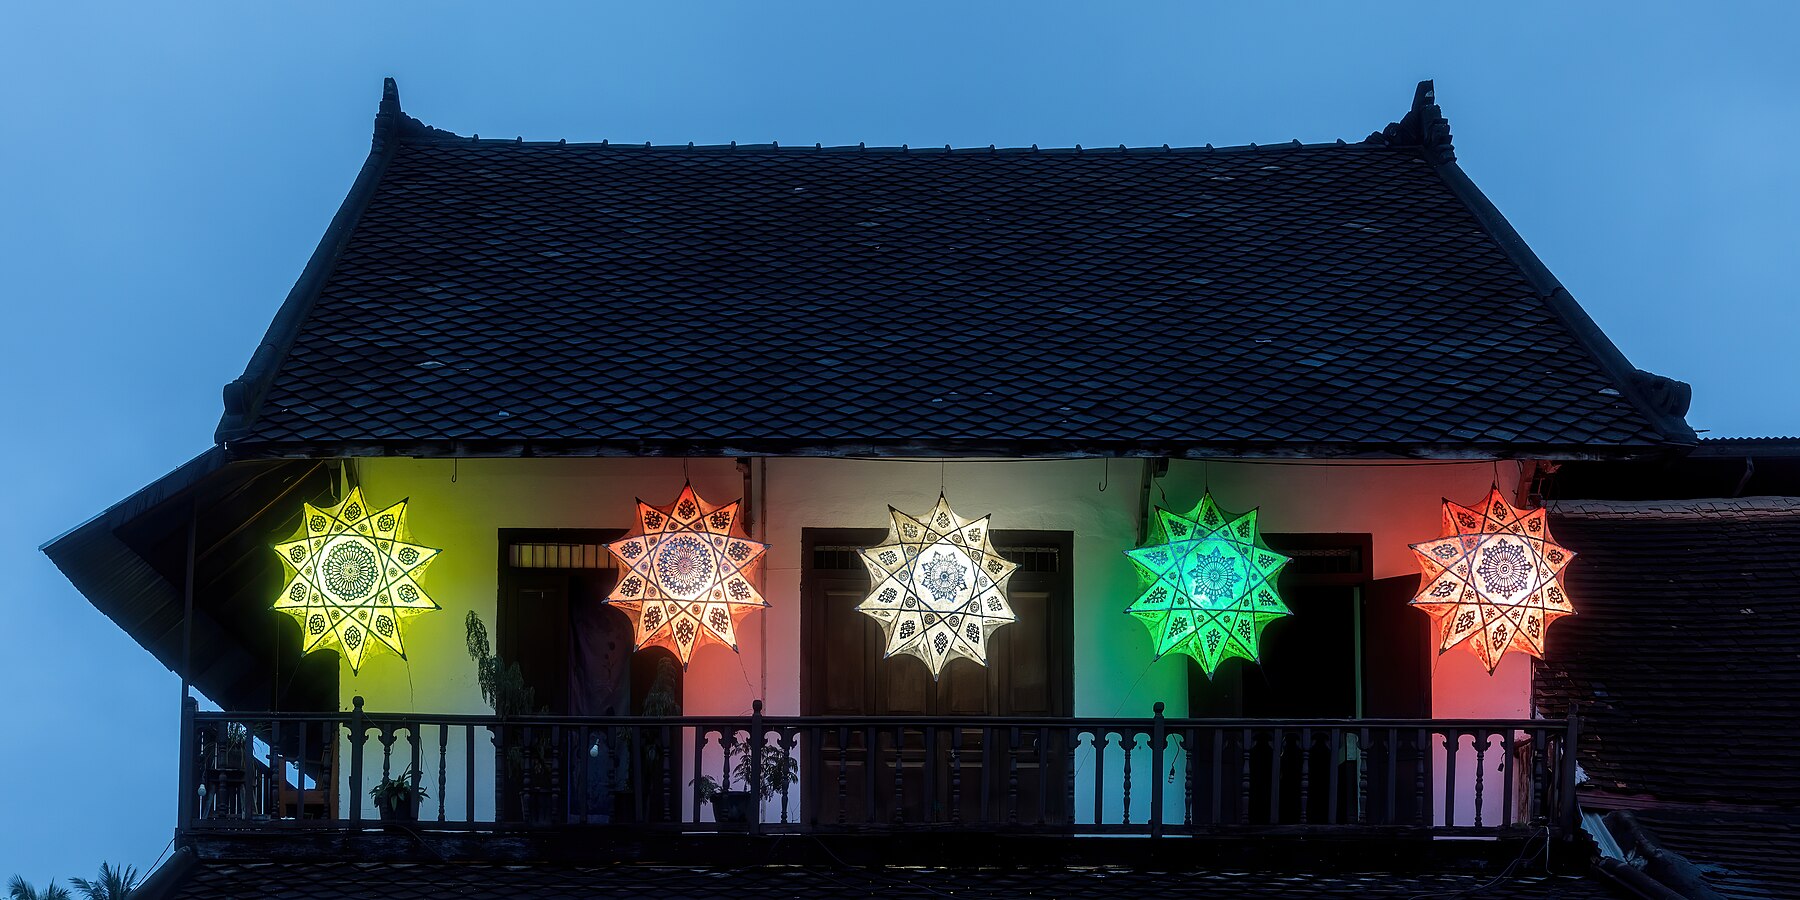 Colorful star-shaped lanterns hanging on a building at blue hour in Luang Prabang Laos